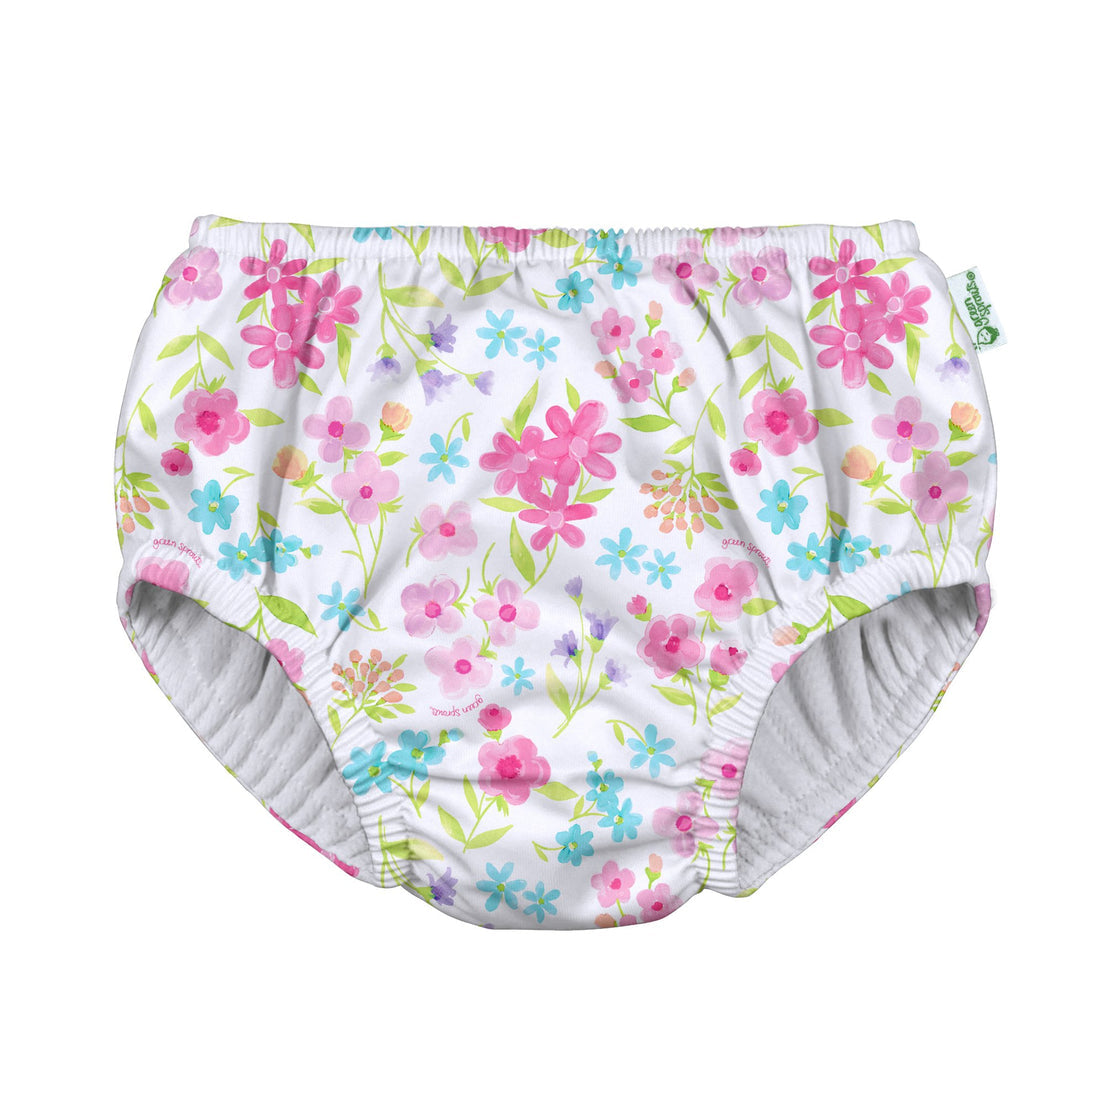 Pull-Up Reusable Absorbent Swim Diaper - White Flower Bouquet